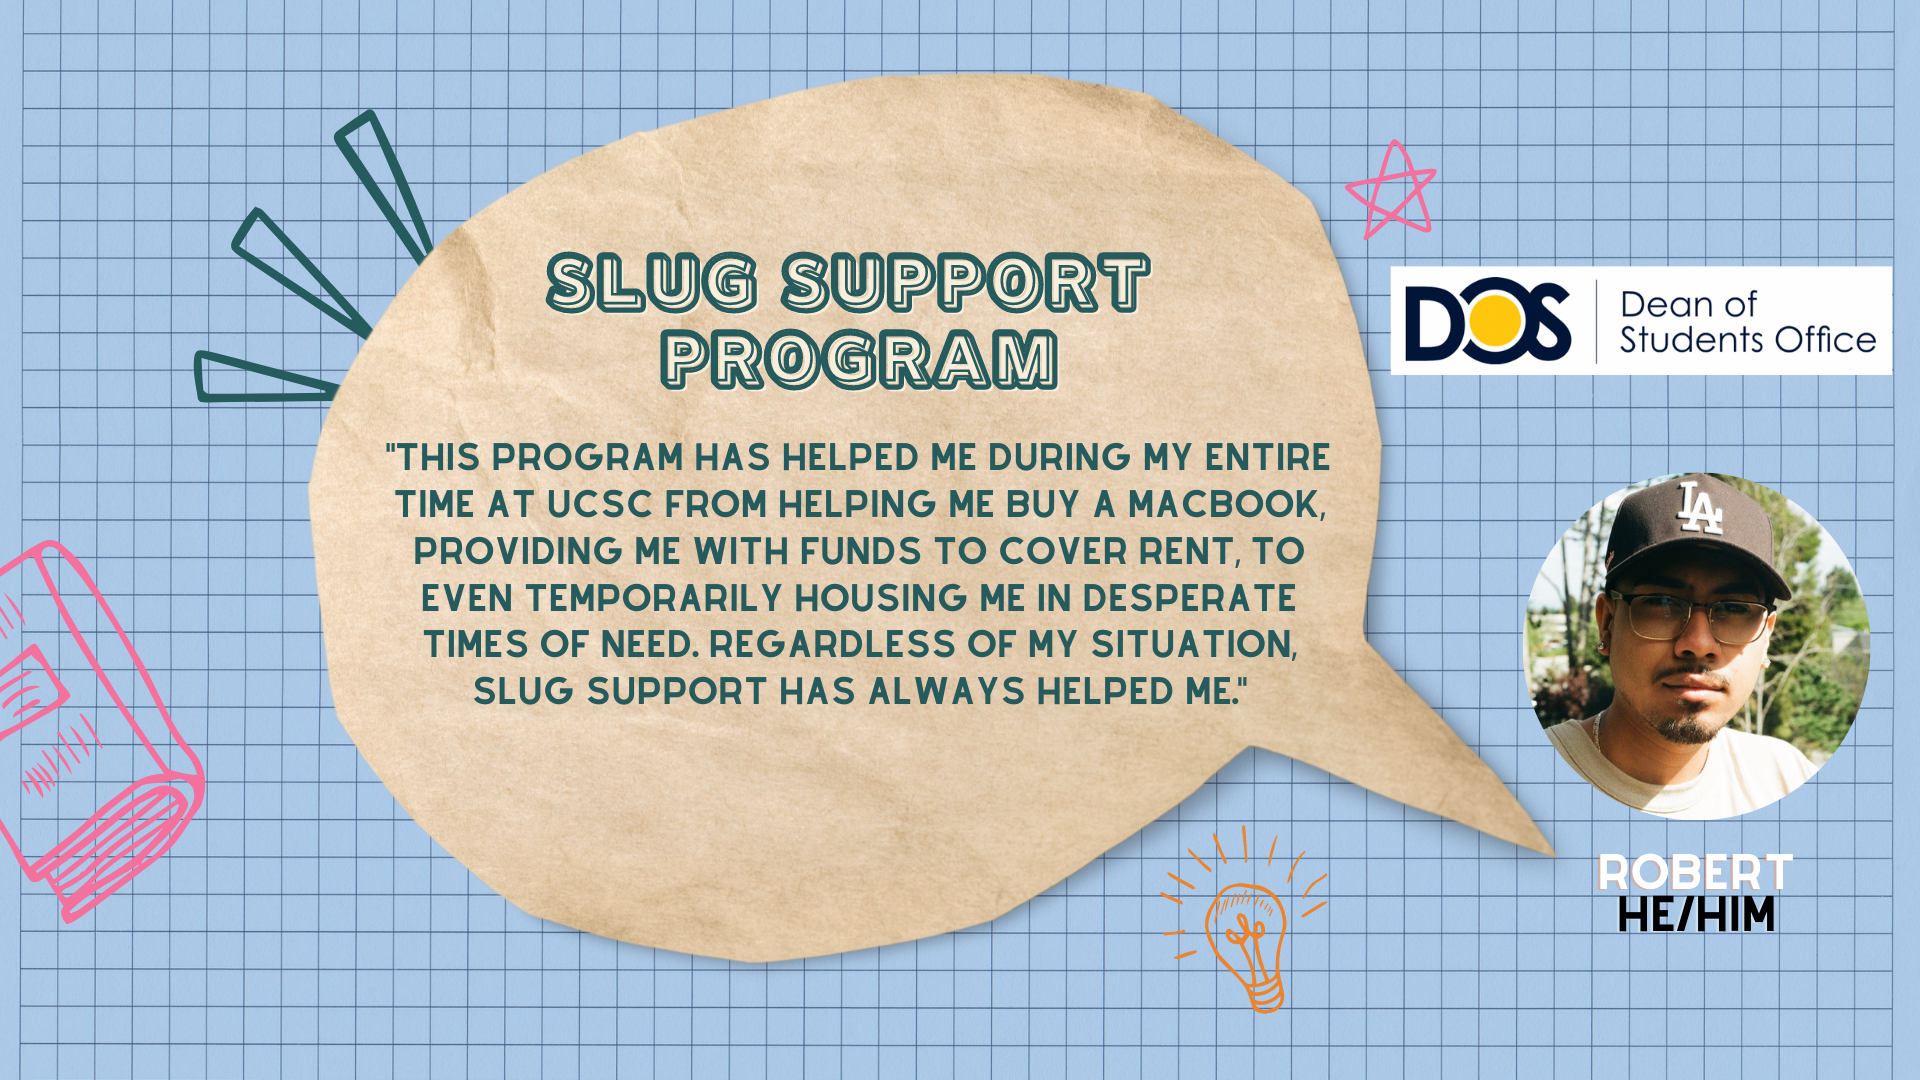 quote: "This program has helped me during my entire time at UCSC from helping me buy a Macbook, providing me with funds to cover rent, to even temporarily housing me in desperate times of need. Regardless of my situation, Slug Support has always helped me."